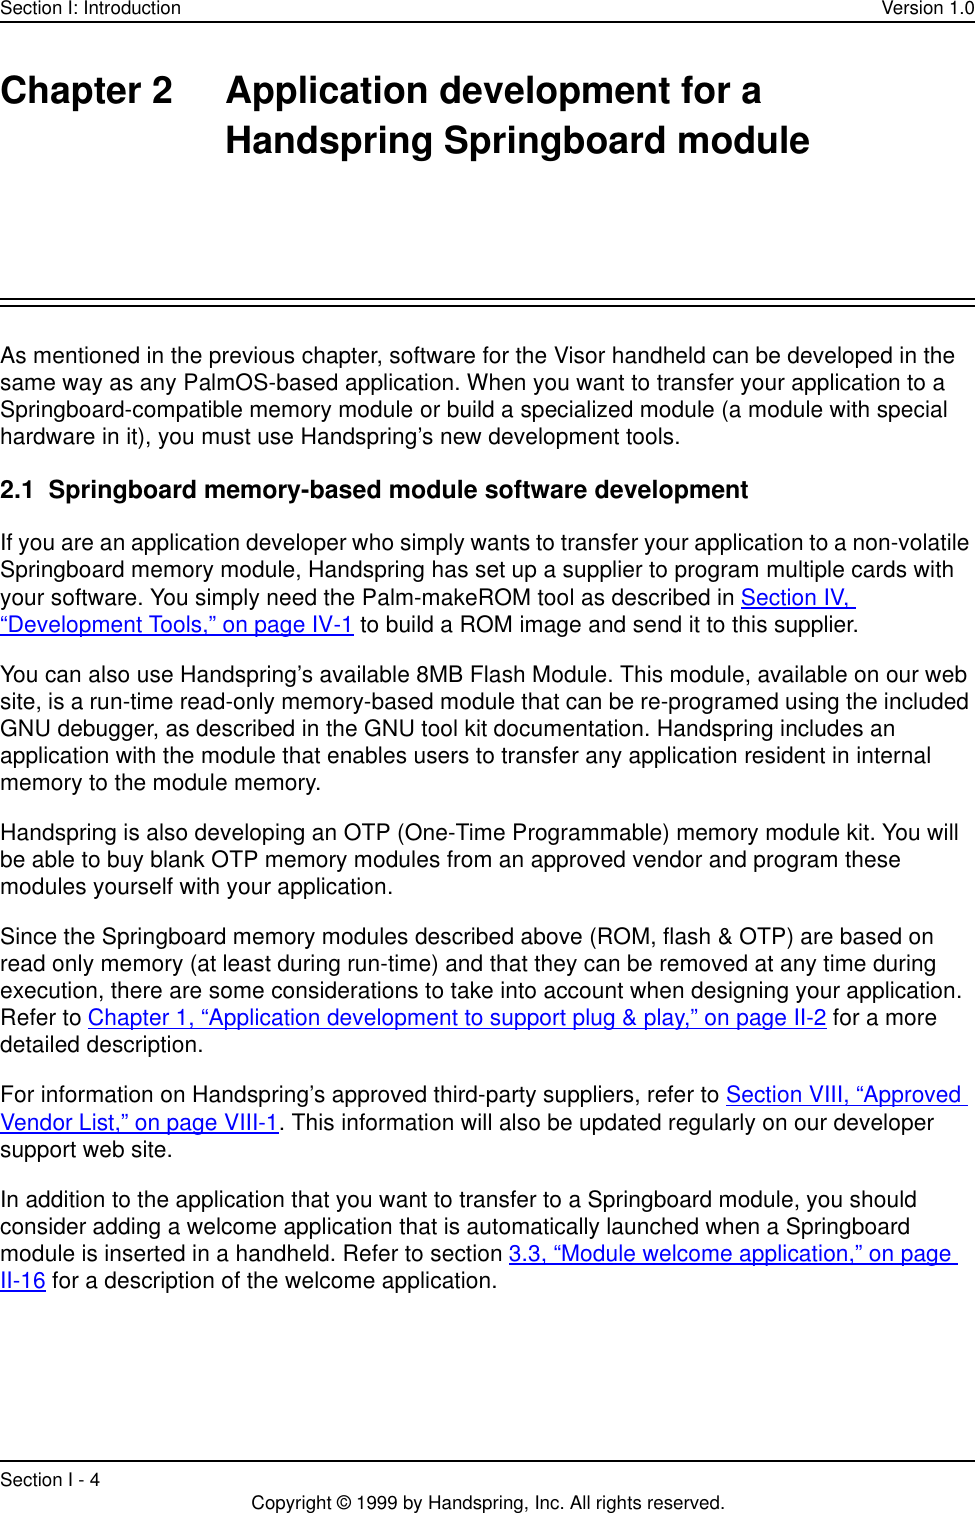 Section I: Introduction Version 1.0Section I - 4 Copyright © 1999 by Handspring, Inc. All rights reserved.Chapter 2 Application development for a Handspring Springboard moduleAs mentioned in the previous chapter, software for the Visor handheld can be developed in the same way as any PalmOS-based application. When you want to transfer your application to a Springboard-compatible memory module or build a specialized module (a module with special hardware in it), you must use Handspring’s new development tools.2.1  Springboard memory-based module software developmentIf you are an application developer who simply wants to transfer your application to a non-volatile Springboard memory module, Handspring has set up a supplier to program multiple cards with your software. You simply need the Palm-makeROM tool as described in Section IV, “Development Tools,” on page IV-1 to build a ROM image and send it to this supplier. You can also use Handspring’s available 8MB Flash Module. This module, available on our web site, is a run-time read-only memory-based module that can be re-programed using the included GNU debugger, as described in the GNU tool kit documentation. Handspring includes an application with the module that enables users to transfer any application resident in internal memory to the module memory.Handspring is also developing an OTP (One-Time Programmable) memory module kit. You will be able to buy blank OTP memory modules from an approved vendor and program these modules yourself with your application.Since the Springboard memory modules described above (ROM, flash &amp; OTP) are based on read only memory (at least during run-time) and that they can be removed at any time during execution, there are some considerations to take into account when designing your application. Refer to Chapter 1, “Application development to support plug &amp; play,” on page II-2 for a more detailed description.For information on Handspring’s approved third-party suppliers, refer to Section VIII, “Approved Vendor List,” on page VIII-1. This information will also be updated regularly on our developer support web site.In addition to the application that you want to transfer to a Springboard module, you should consider adding a welcome application that is automatically launched when a Springboard module is inserted in a handheld. Refer to section 3.3, “Module welcome application,” on page II-16 for a description of the welcome application.